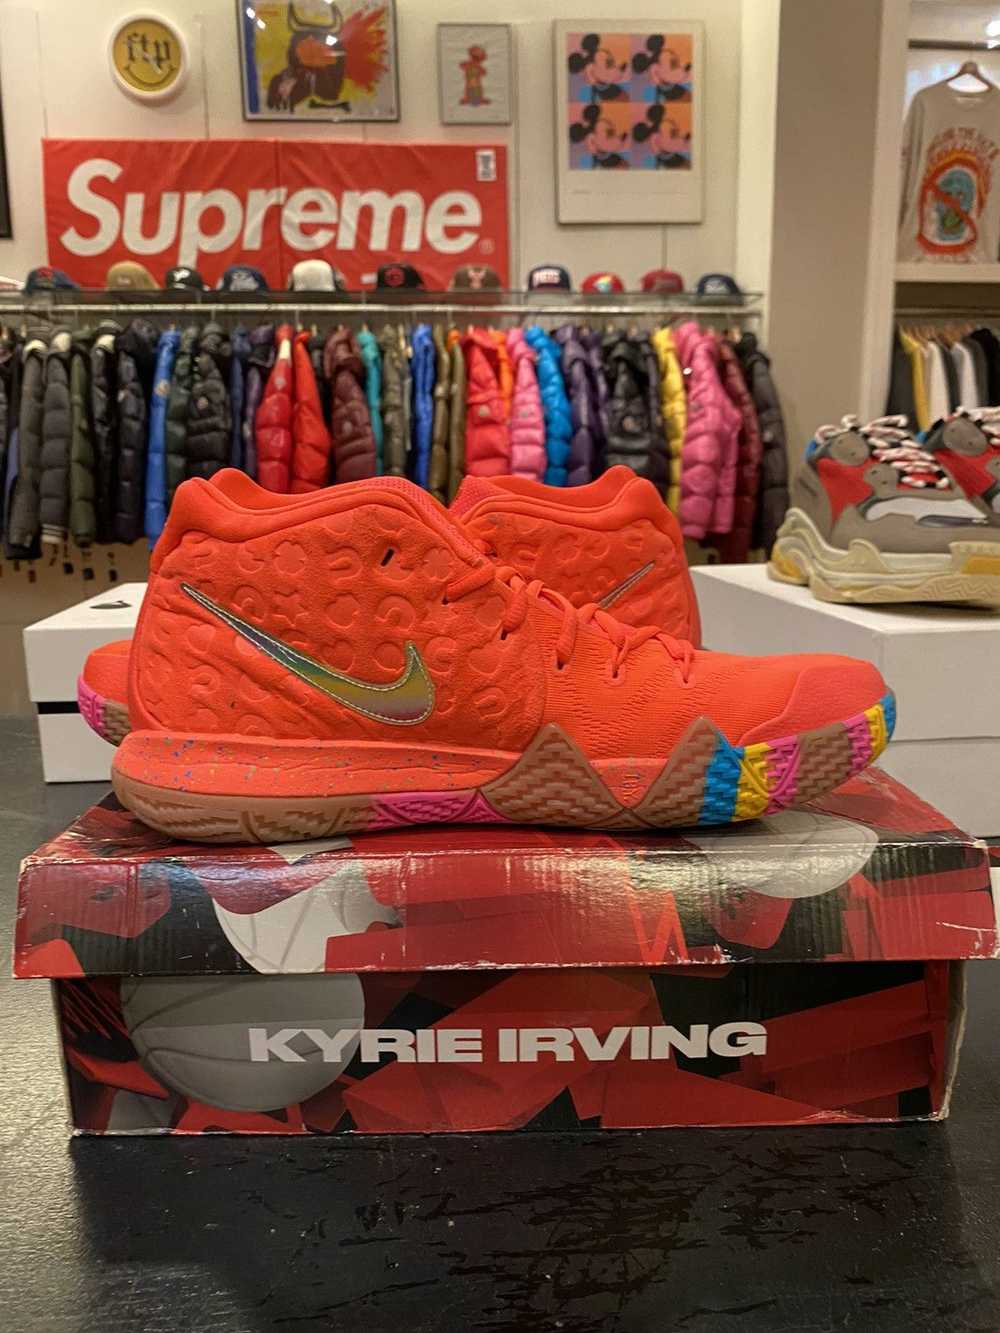 Nike Kyrie 4 lucky charms - image 5